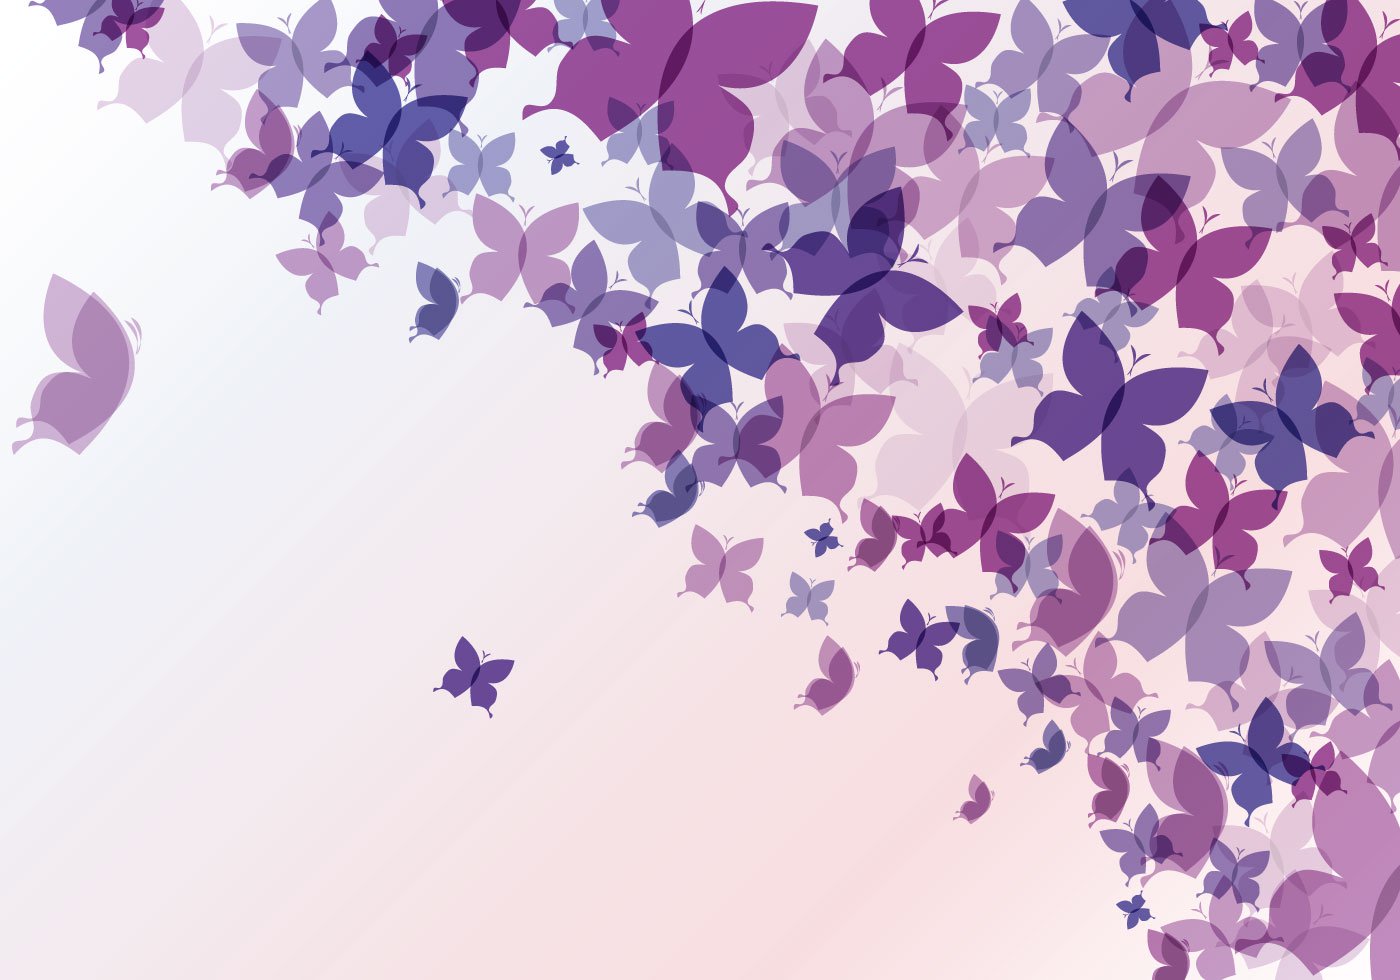 Abstract Butterfly Background   Download Free Vector Art